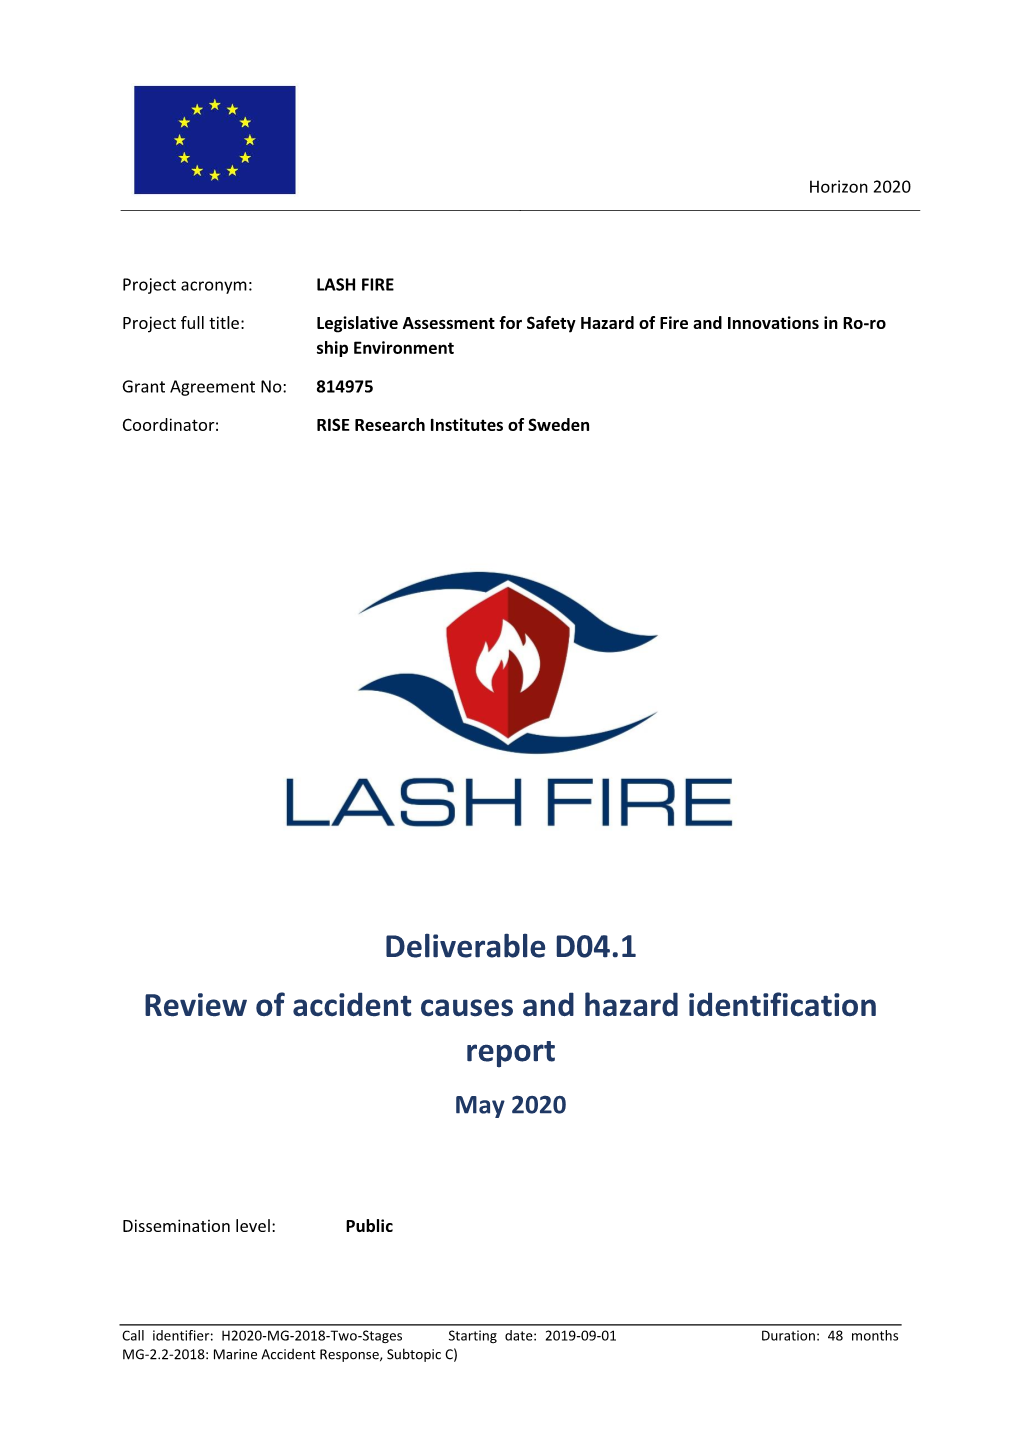 Deliverable D04.1 Review of Accident Causes and Hazard Identification Report May 2020